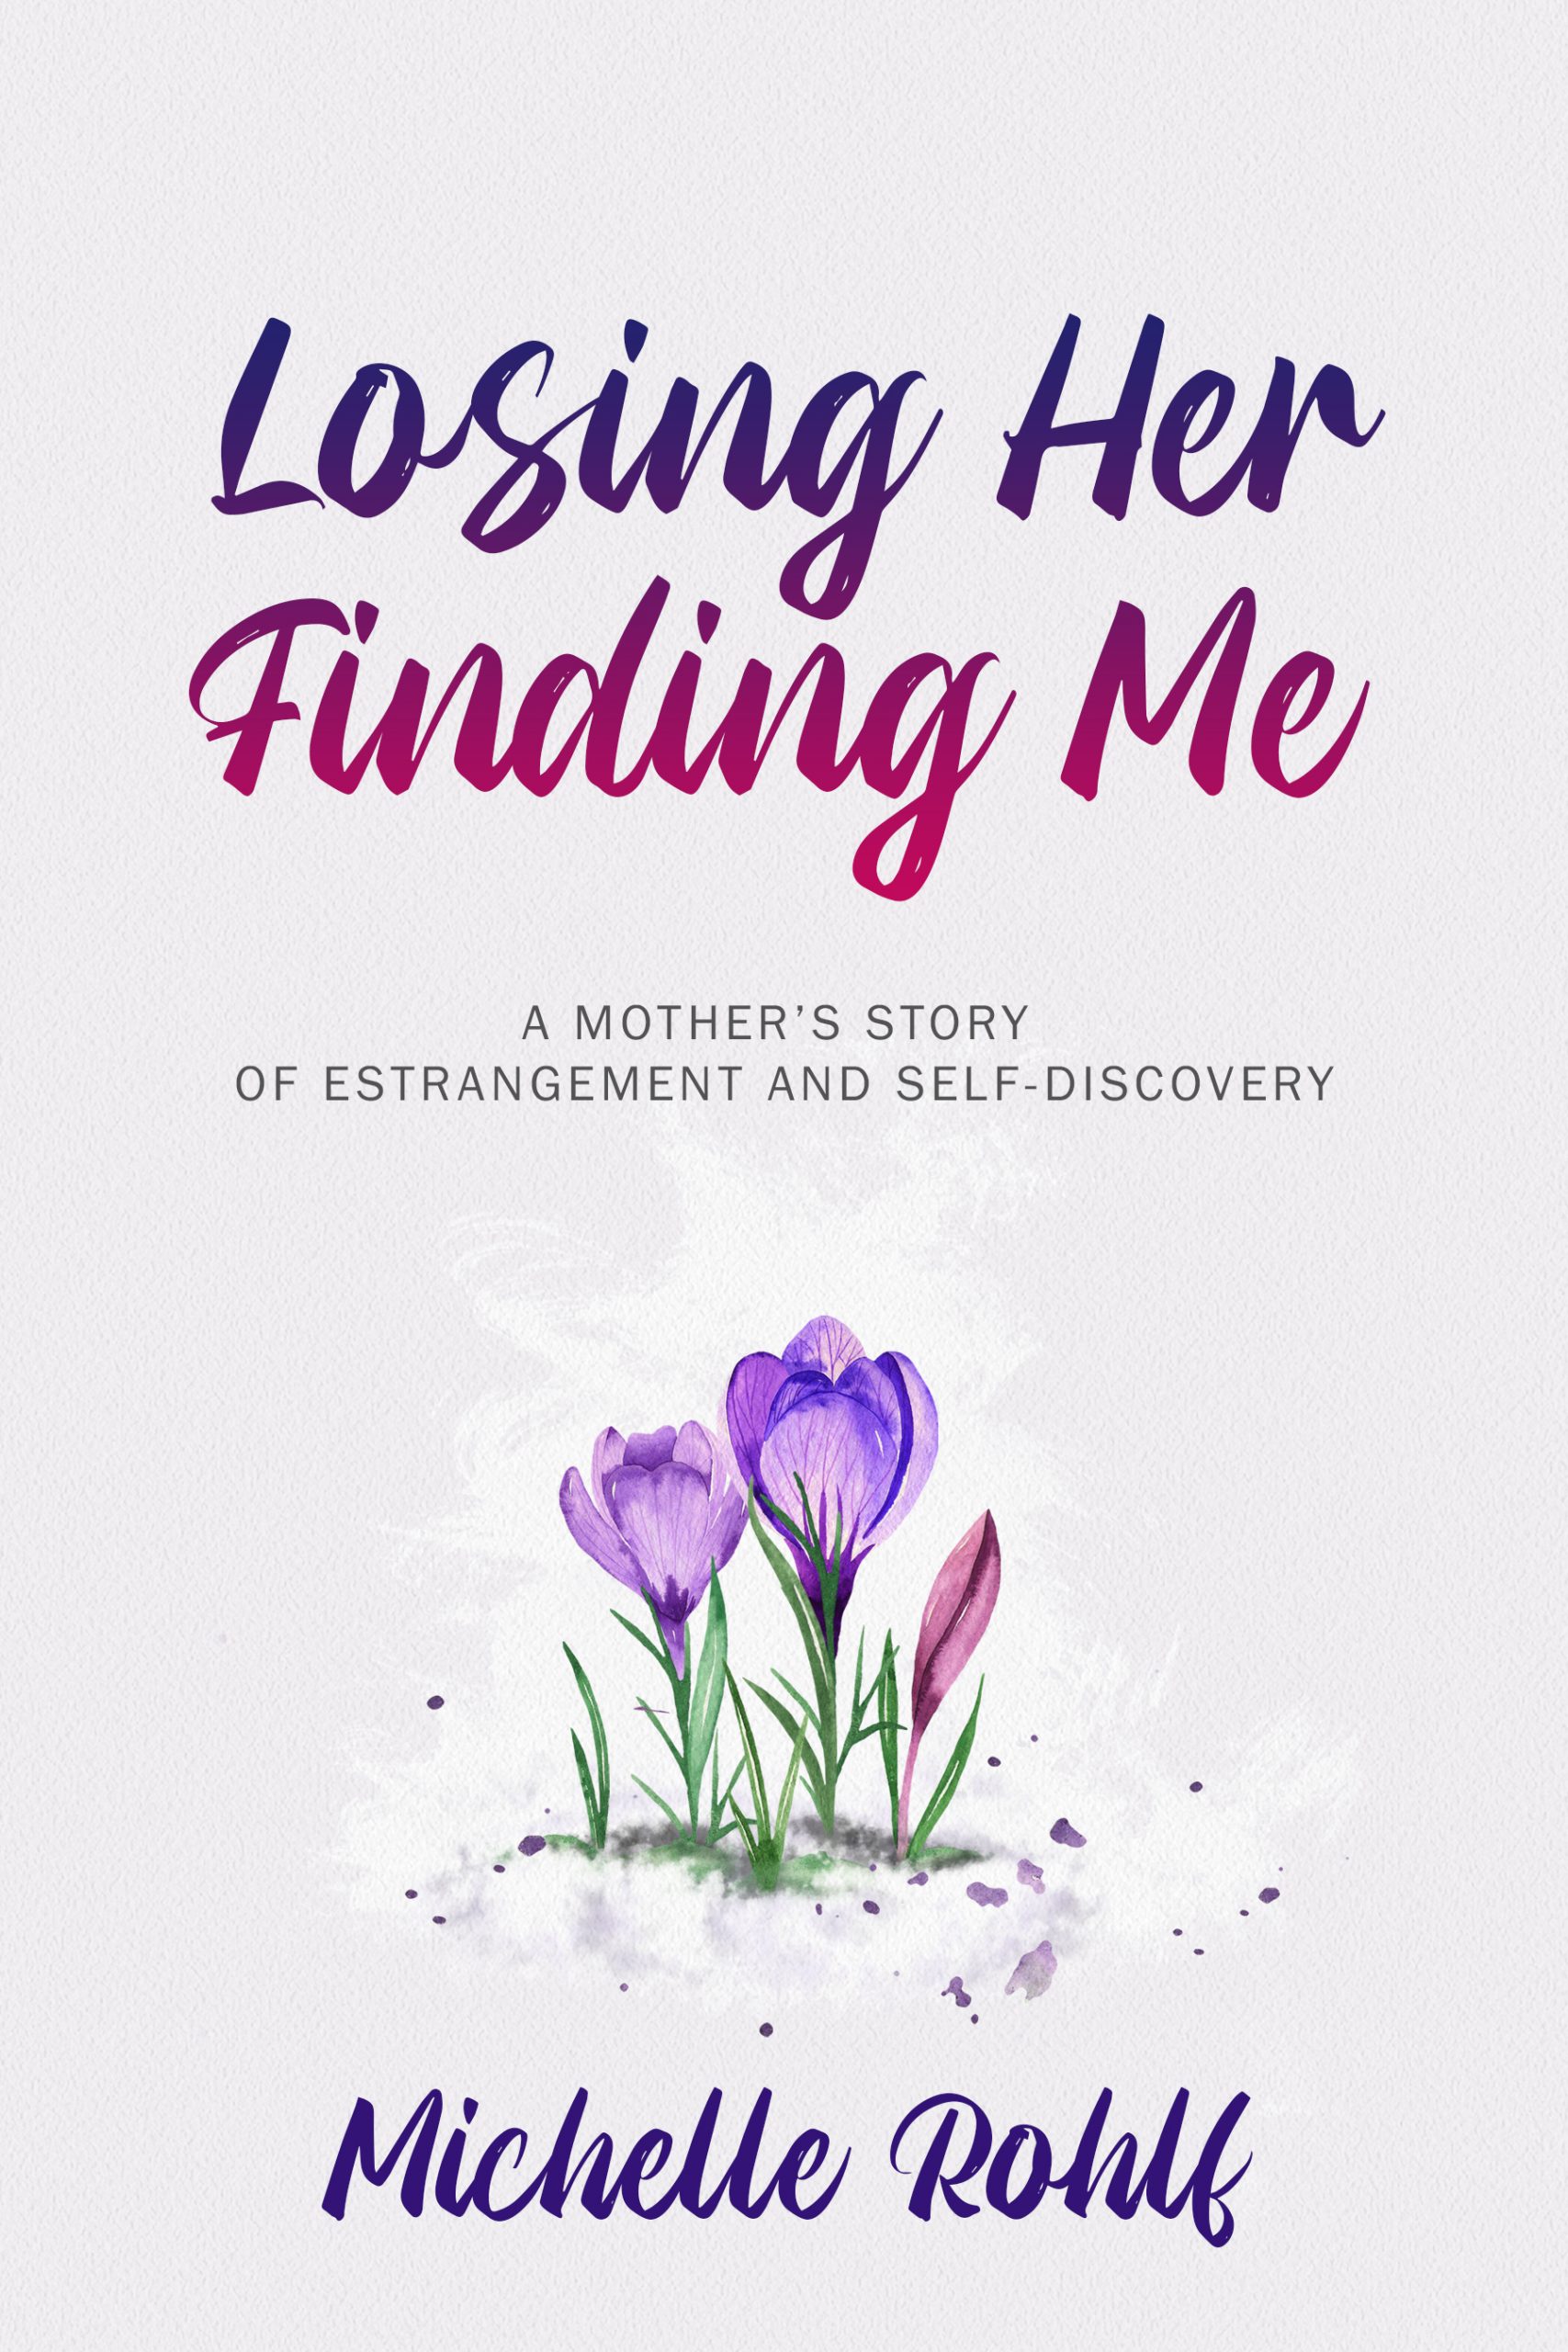 Losing Her Finding Me